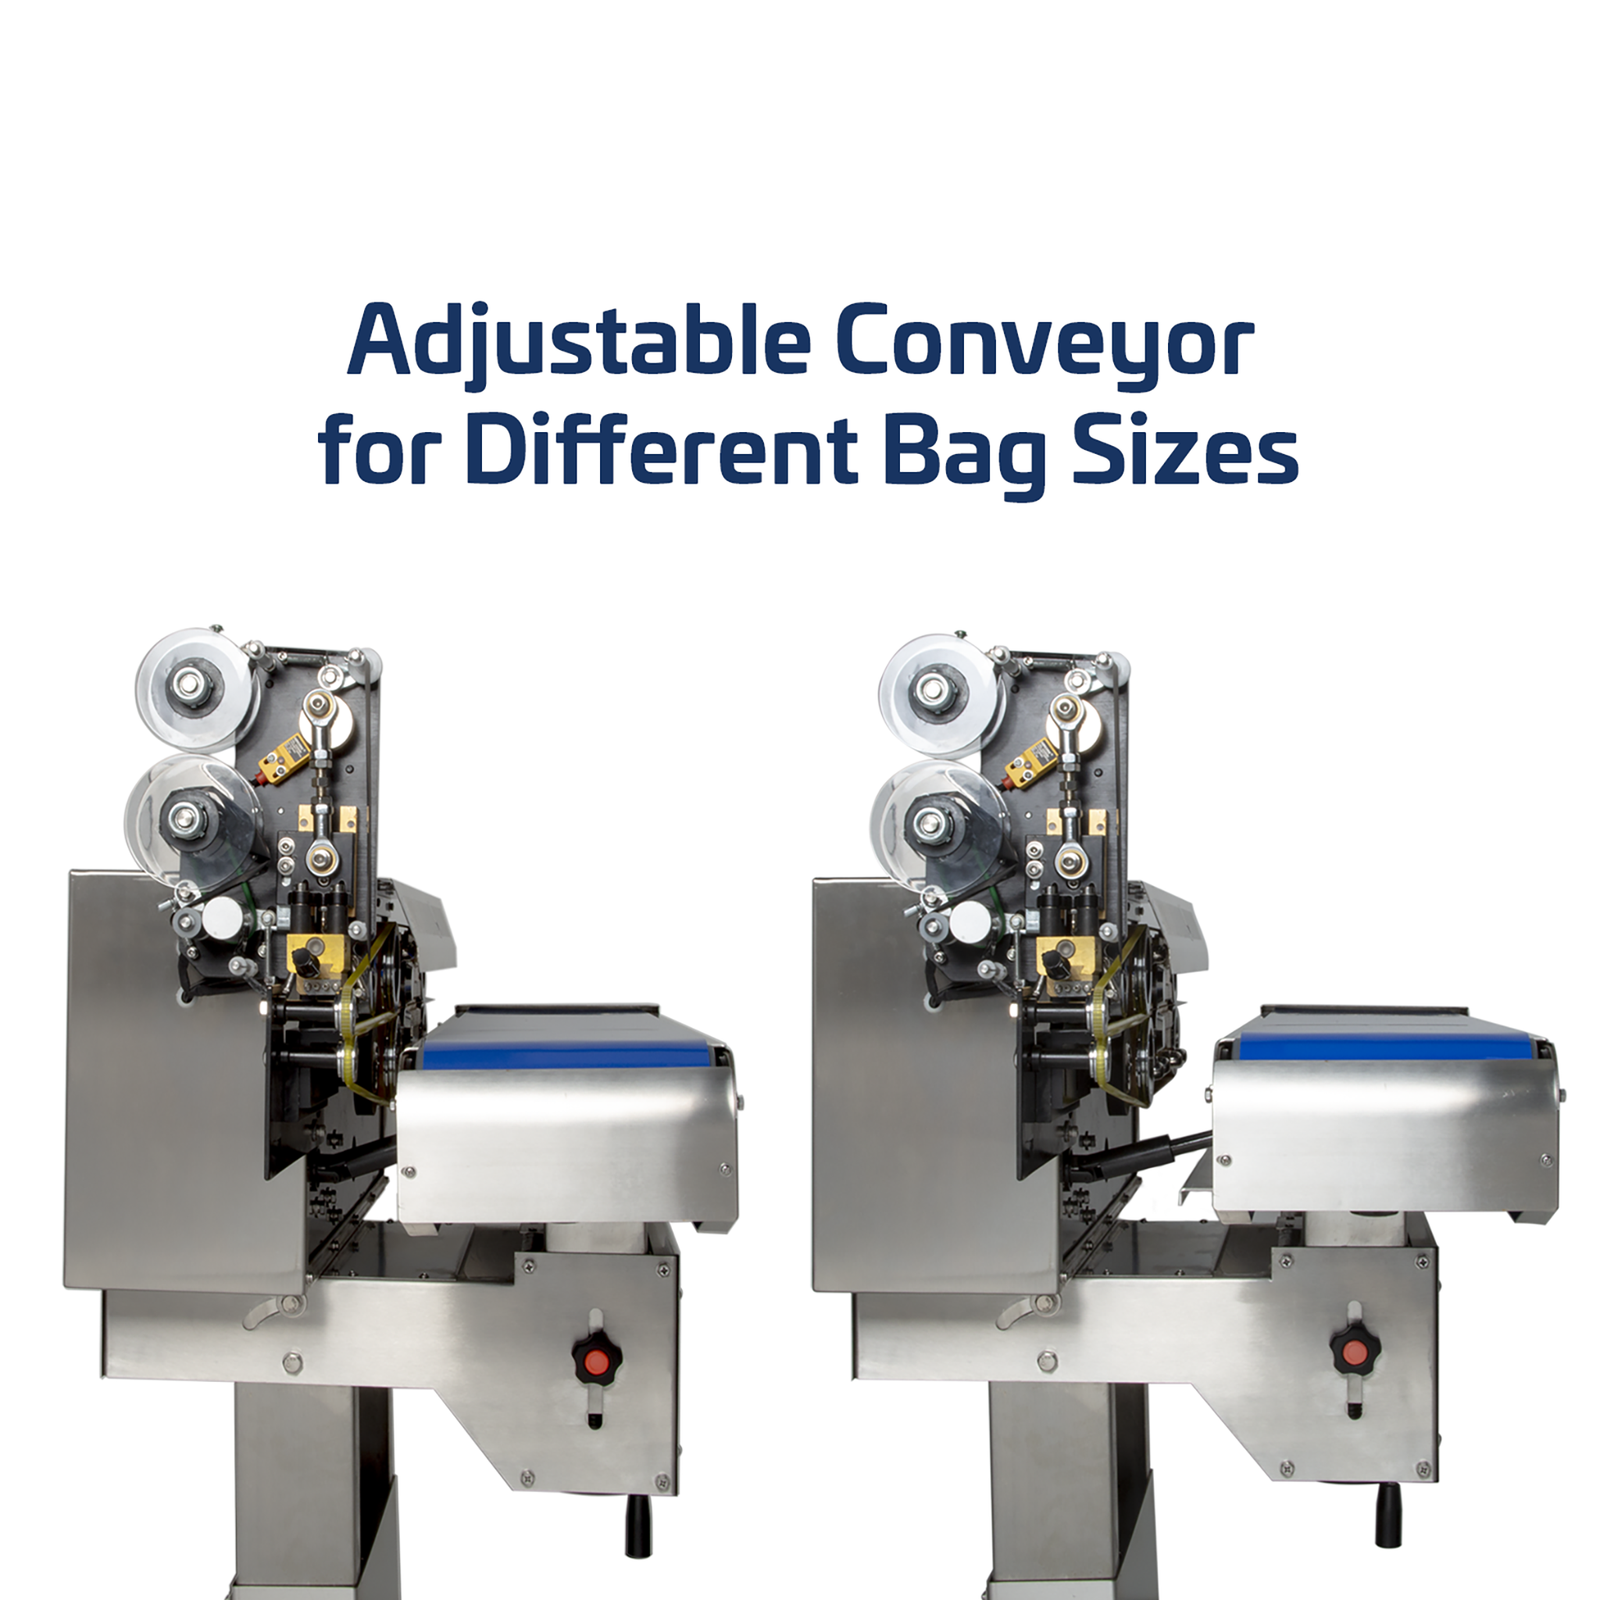 Two JORES TECHNOLOGIES® horizontal continuous band sealers next to each other to indicate that the portion of the revolving band can be separated from the body of the bag sealer to seal larger bags.